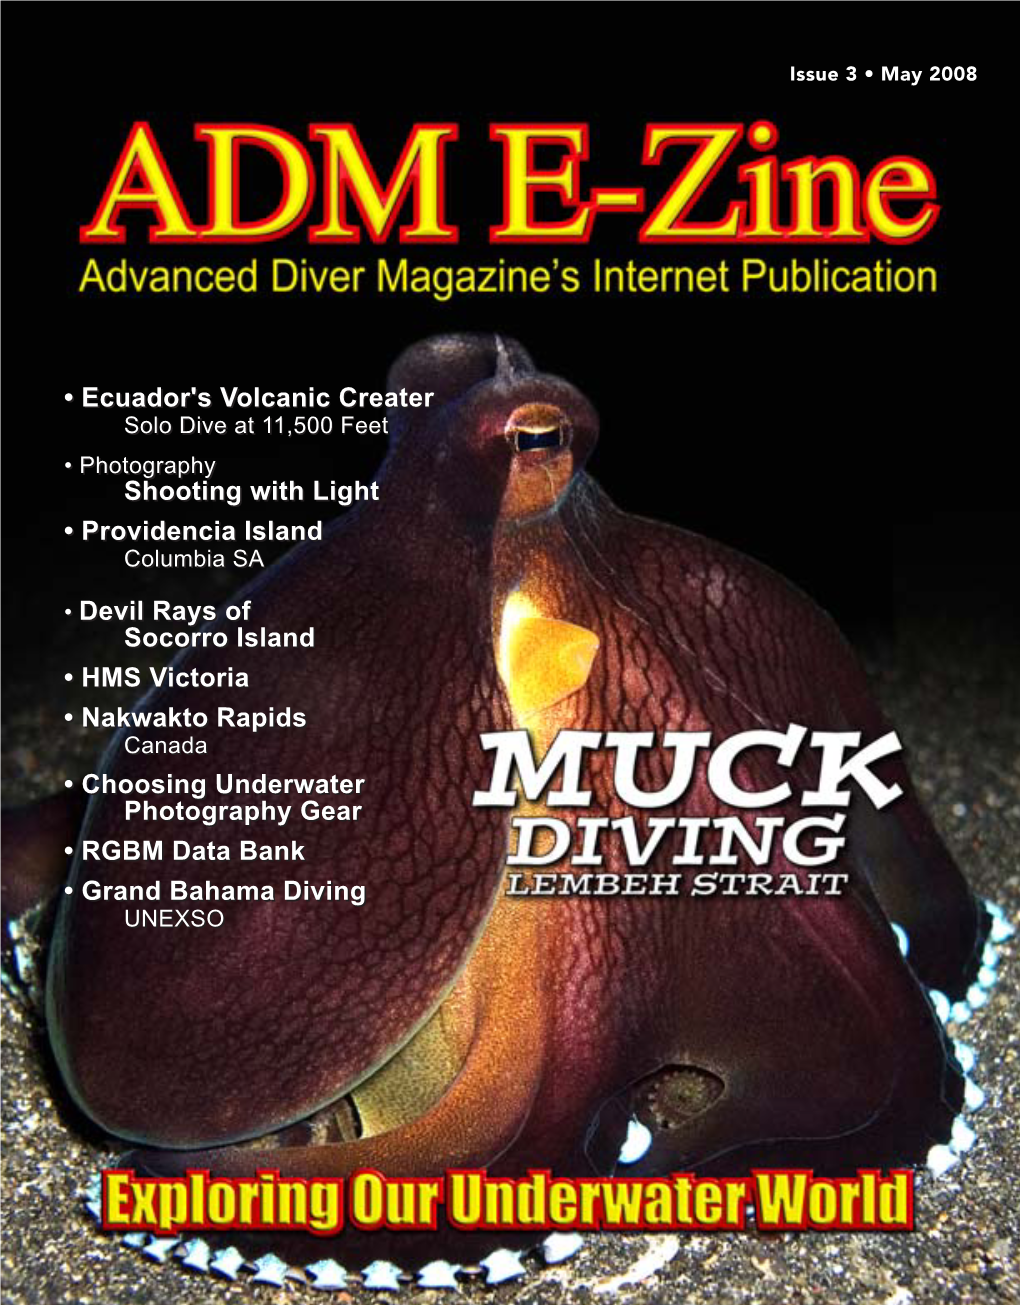 ADM E-ZINE ISSUE 3 ADM E-ZINE ISSUE 3 • 1131 Extreme Solo Diving Is Not for Everyone; but for Me, This Only Added to the Challenge